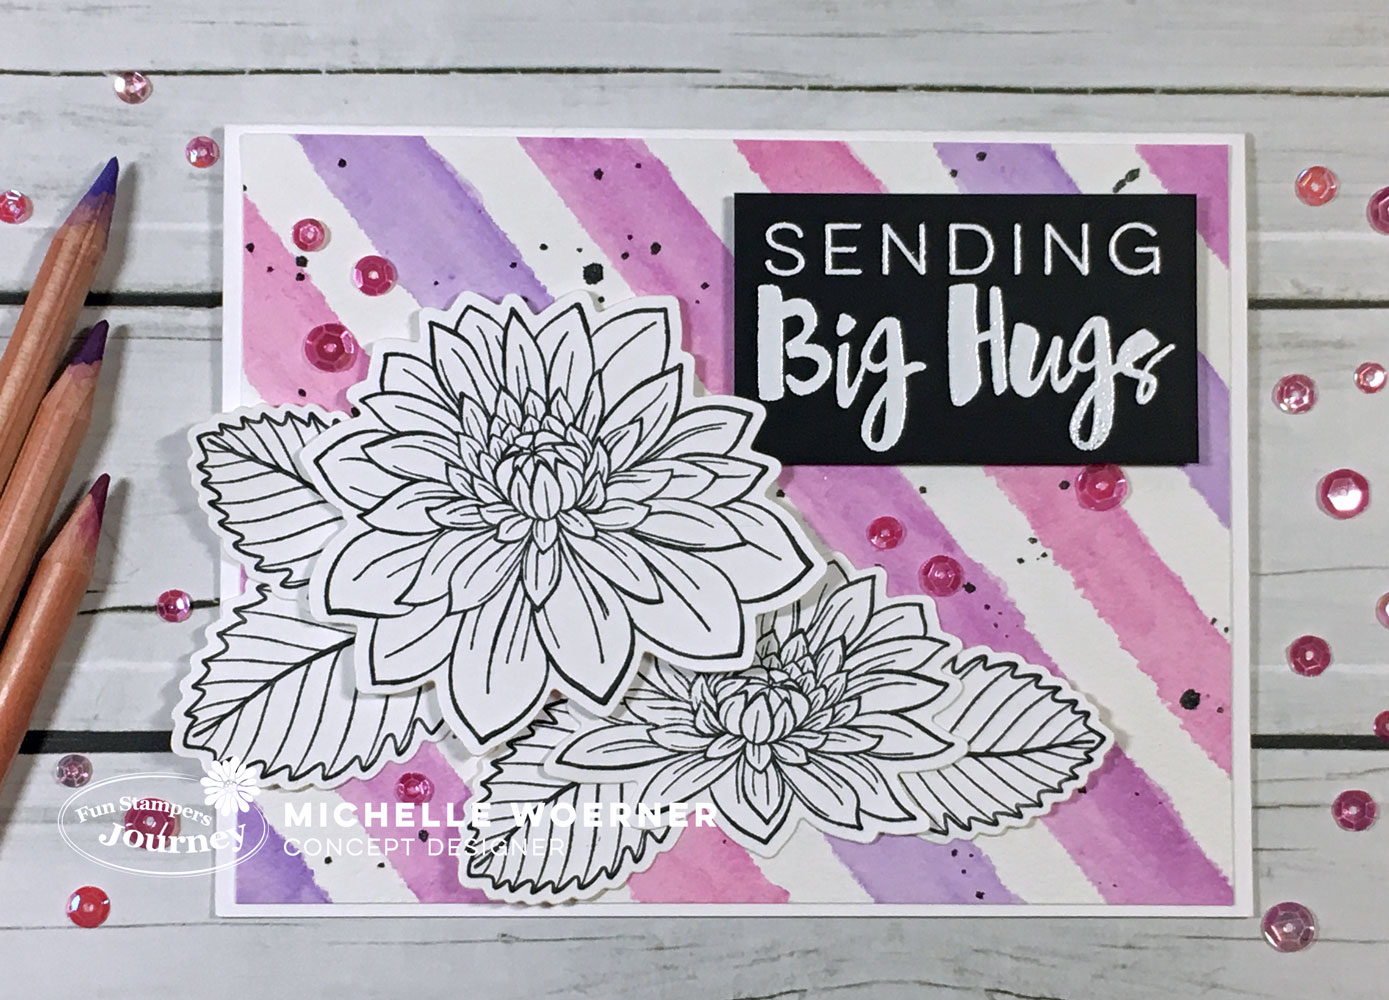 Stop and Stamp the roses: Seasons Givings 2019: A special blog hop